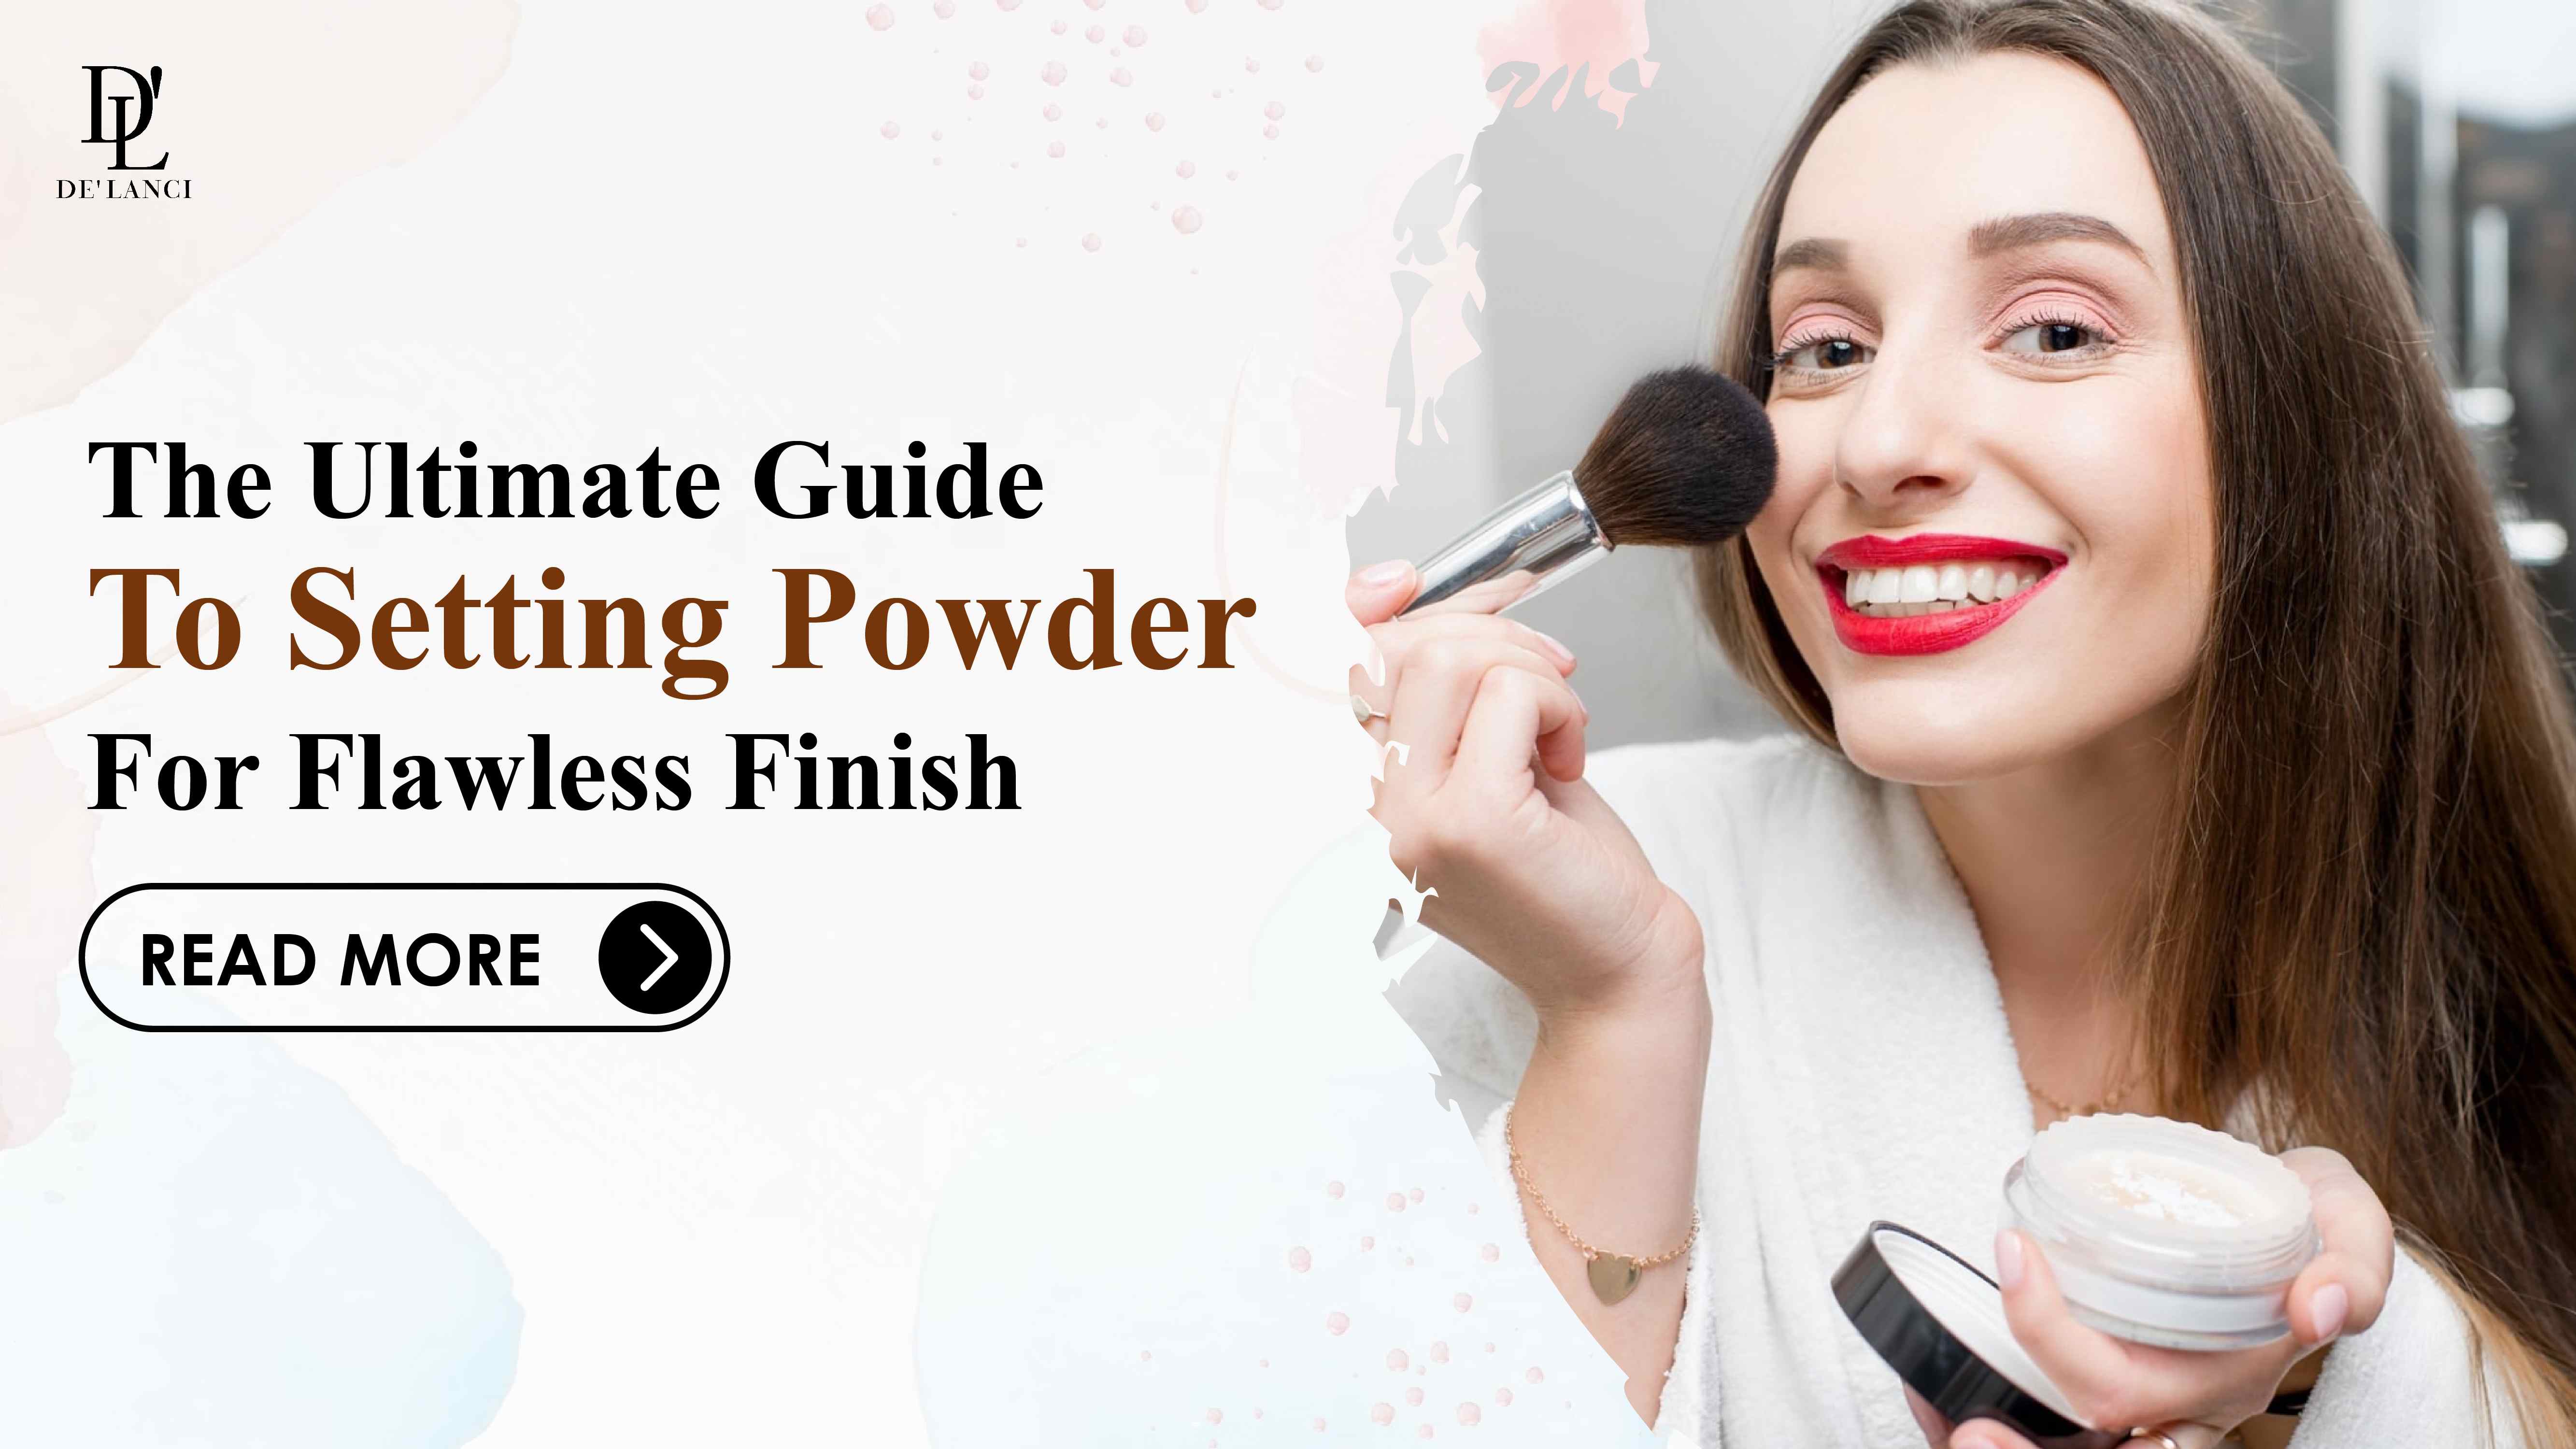 The Ultimate Guide to Setting Powder for Flawless Finish – De